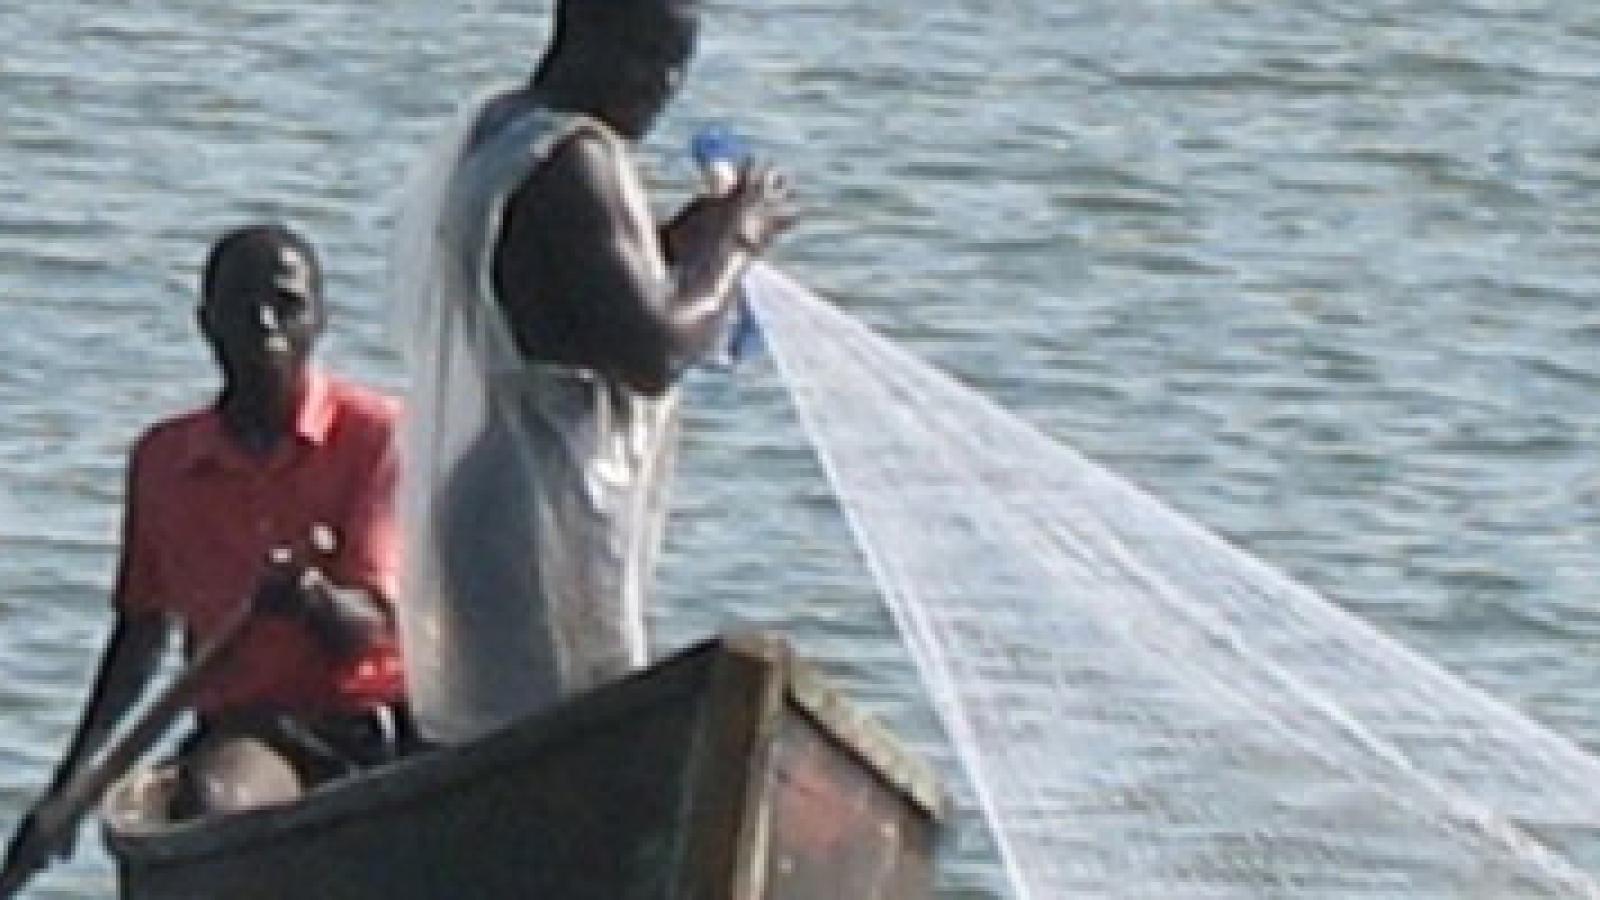 A pair of fisherman pull in their nets.